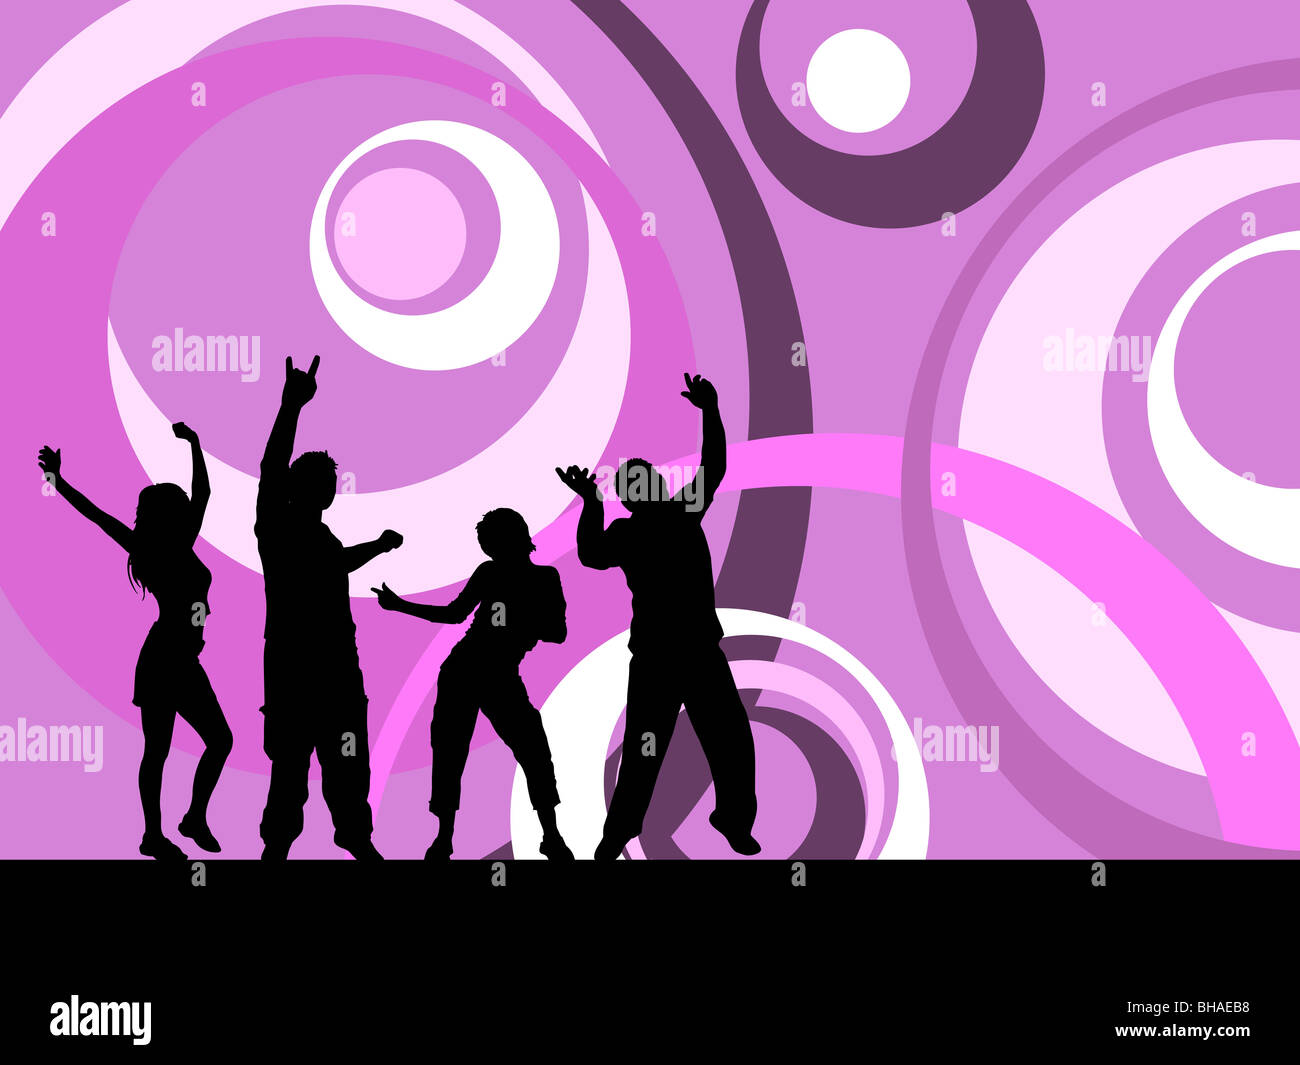 Silhouettes of people dancing on a retro styled abstract background Stock Photo